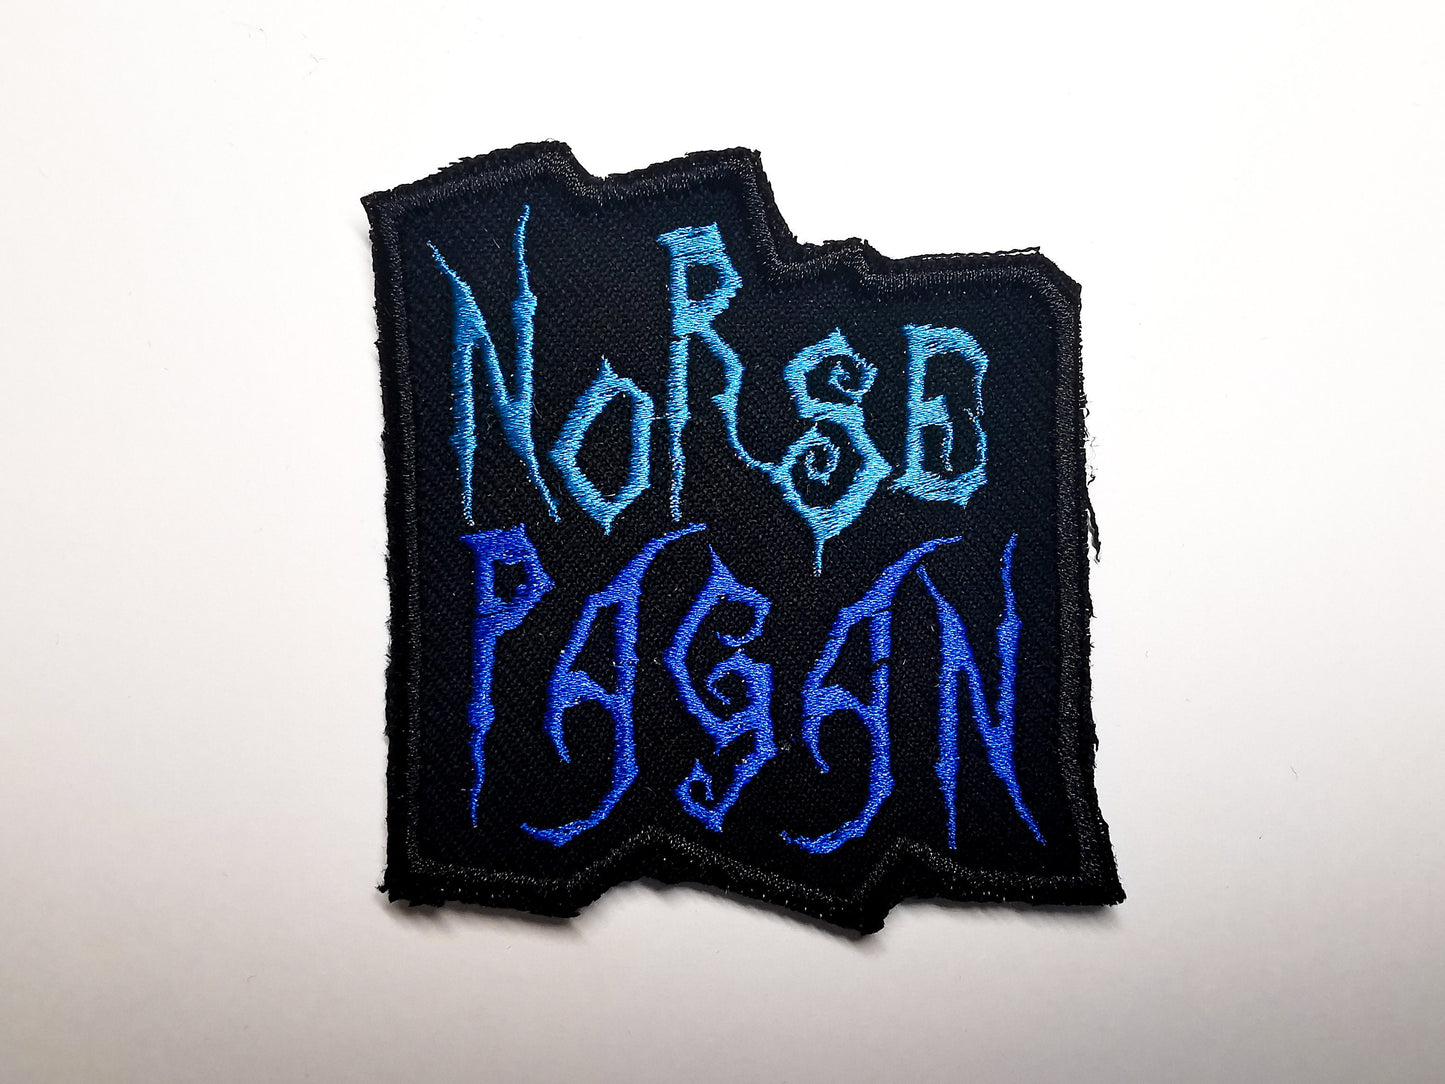 Norse Pagan Two Shades of Blue Embroidered Patch Heavy Metal style patch